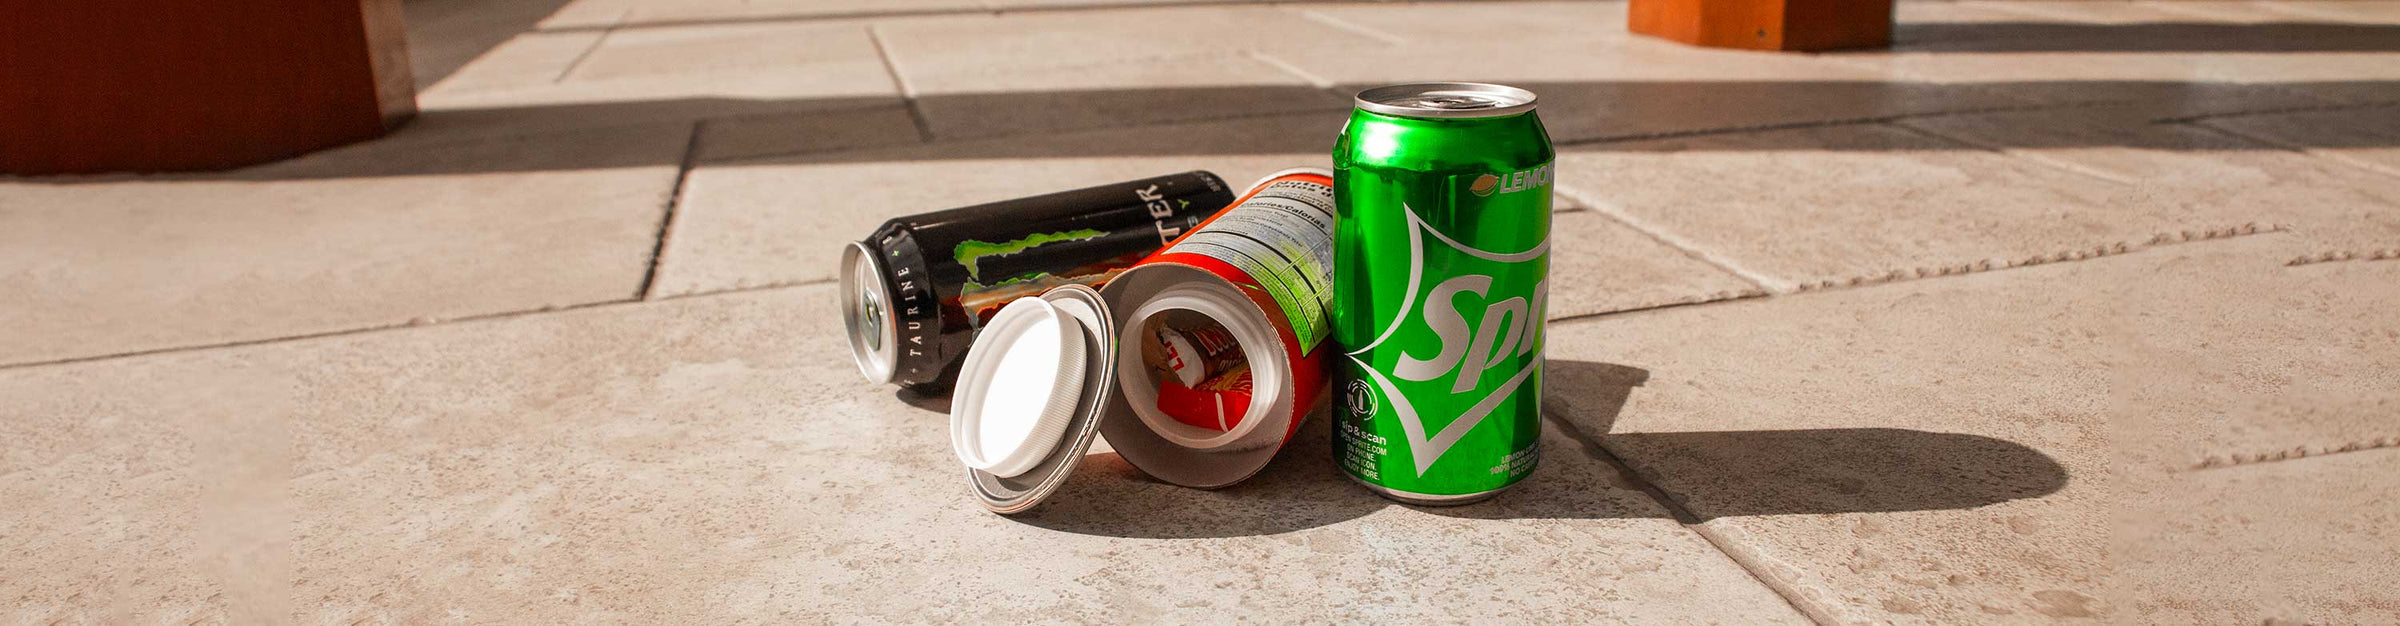 Diversion Safe Cans standing on office floor with one lid open